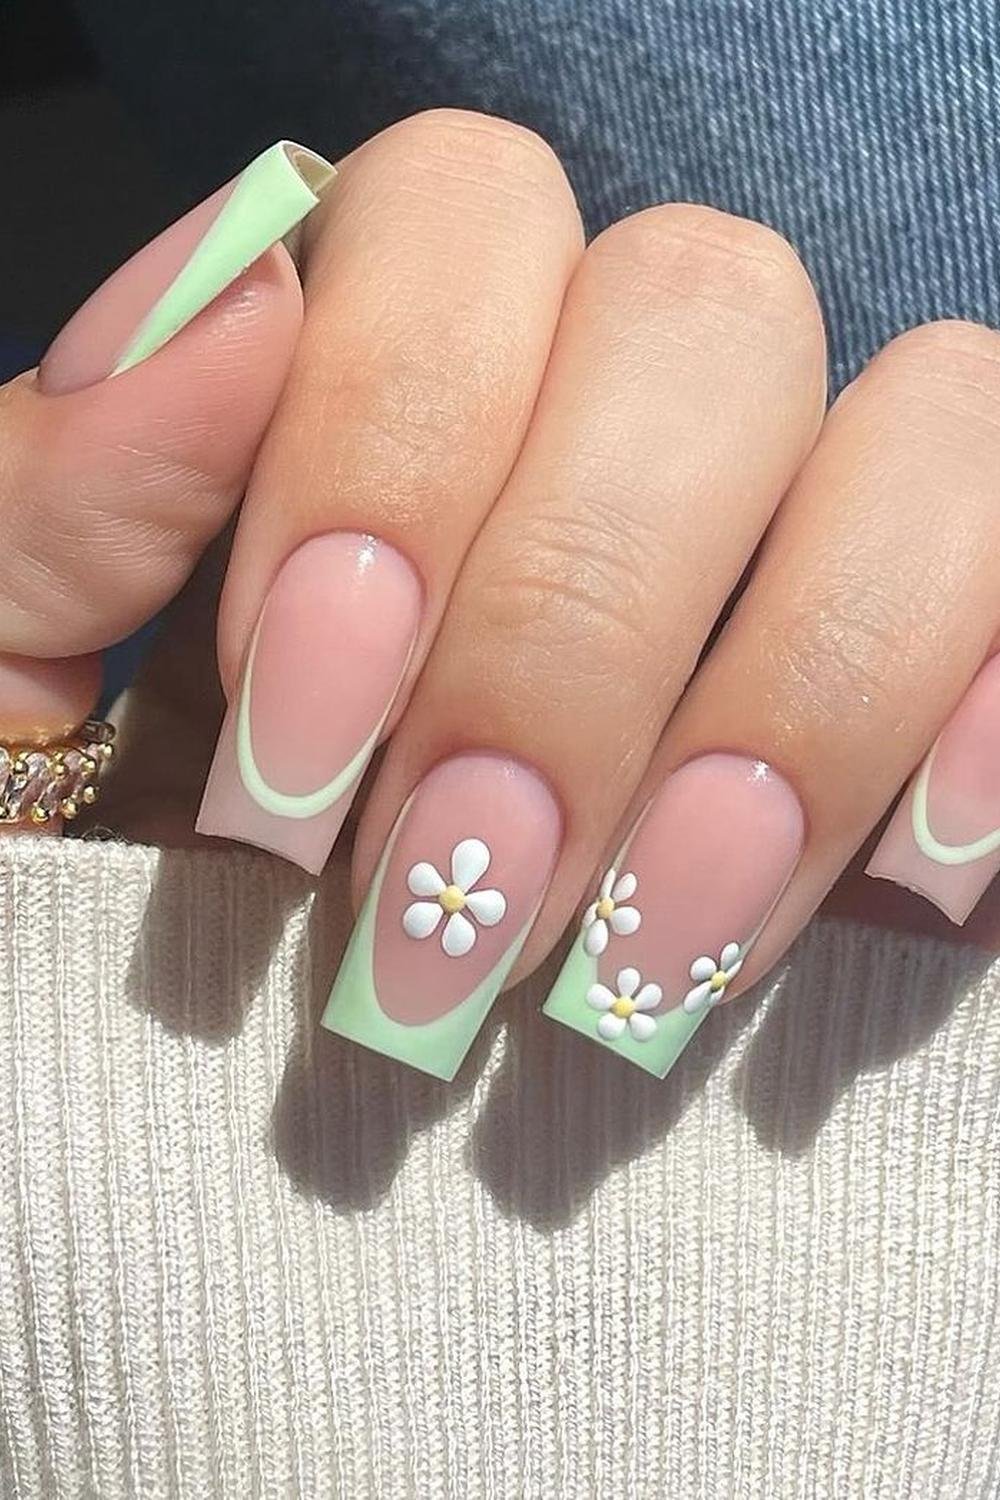 24 - Picture of Whimsical Nails